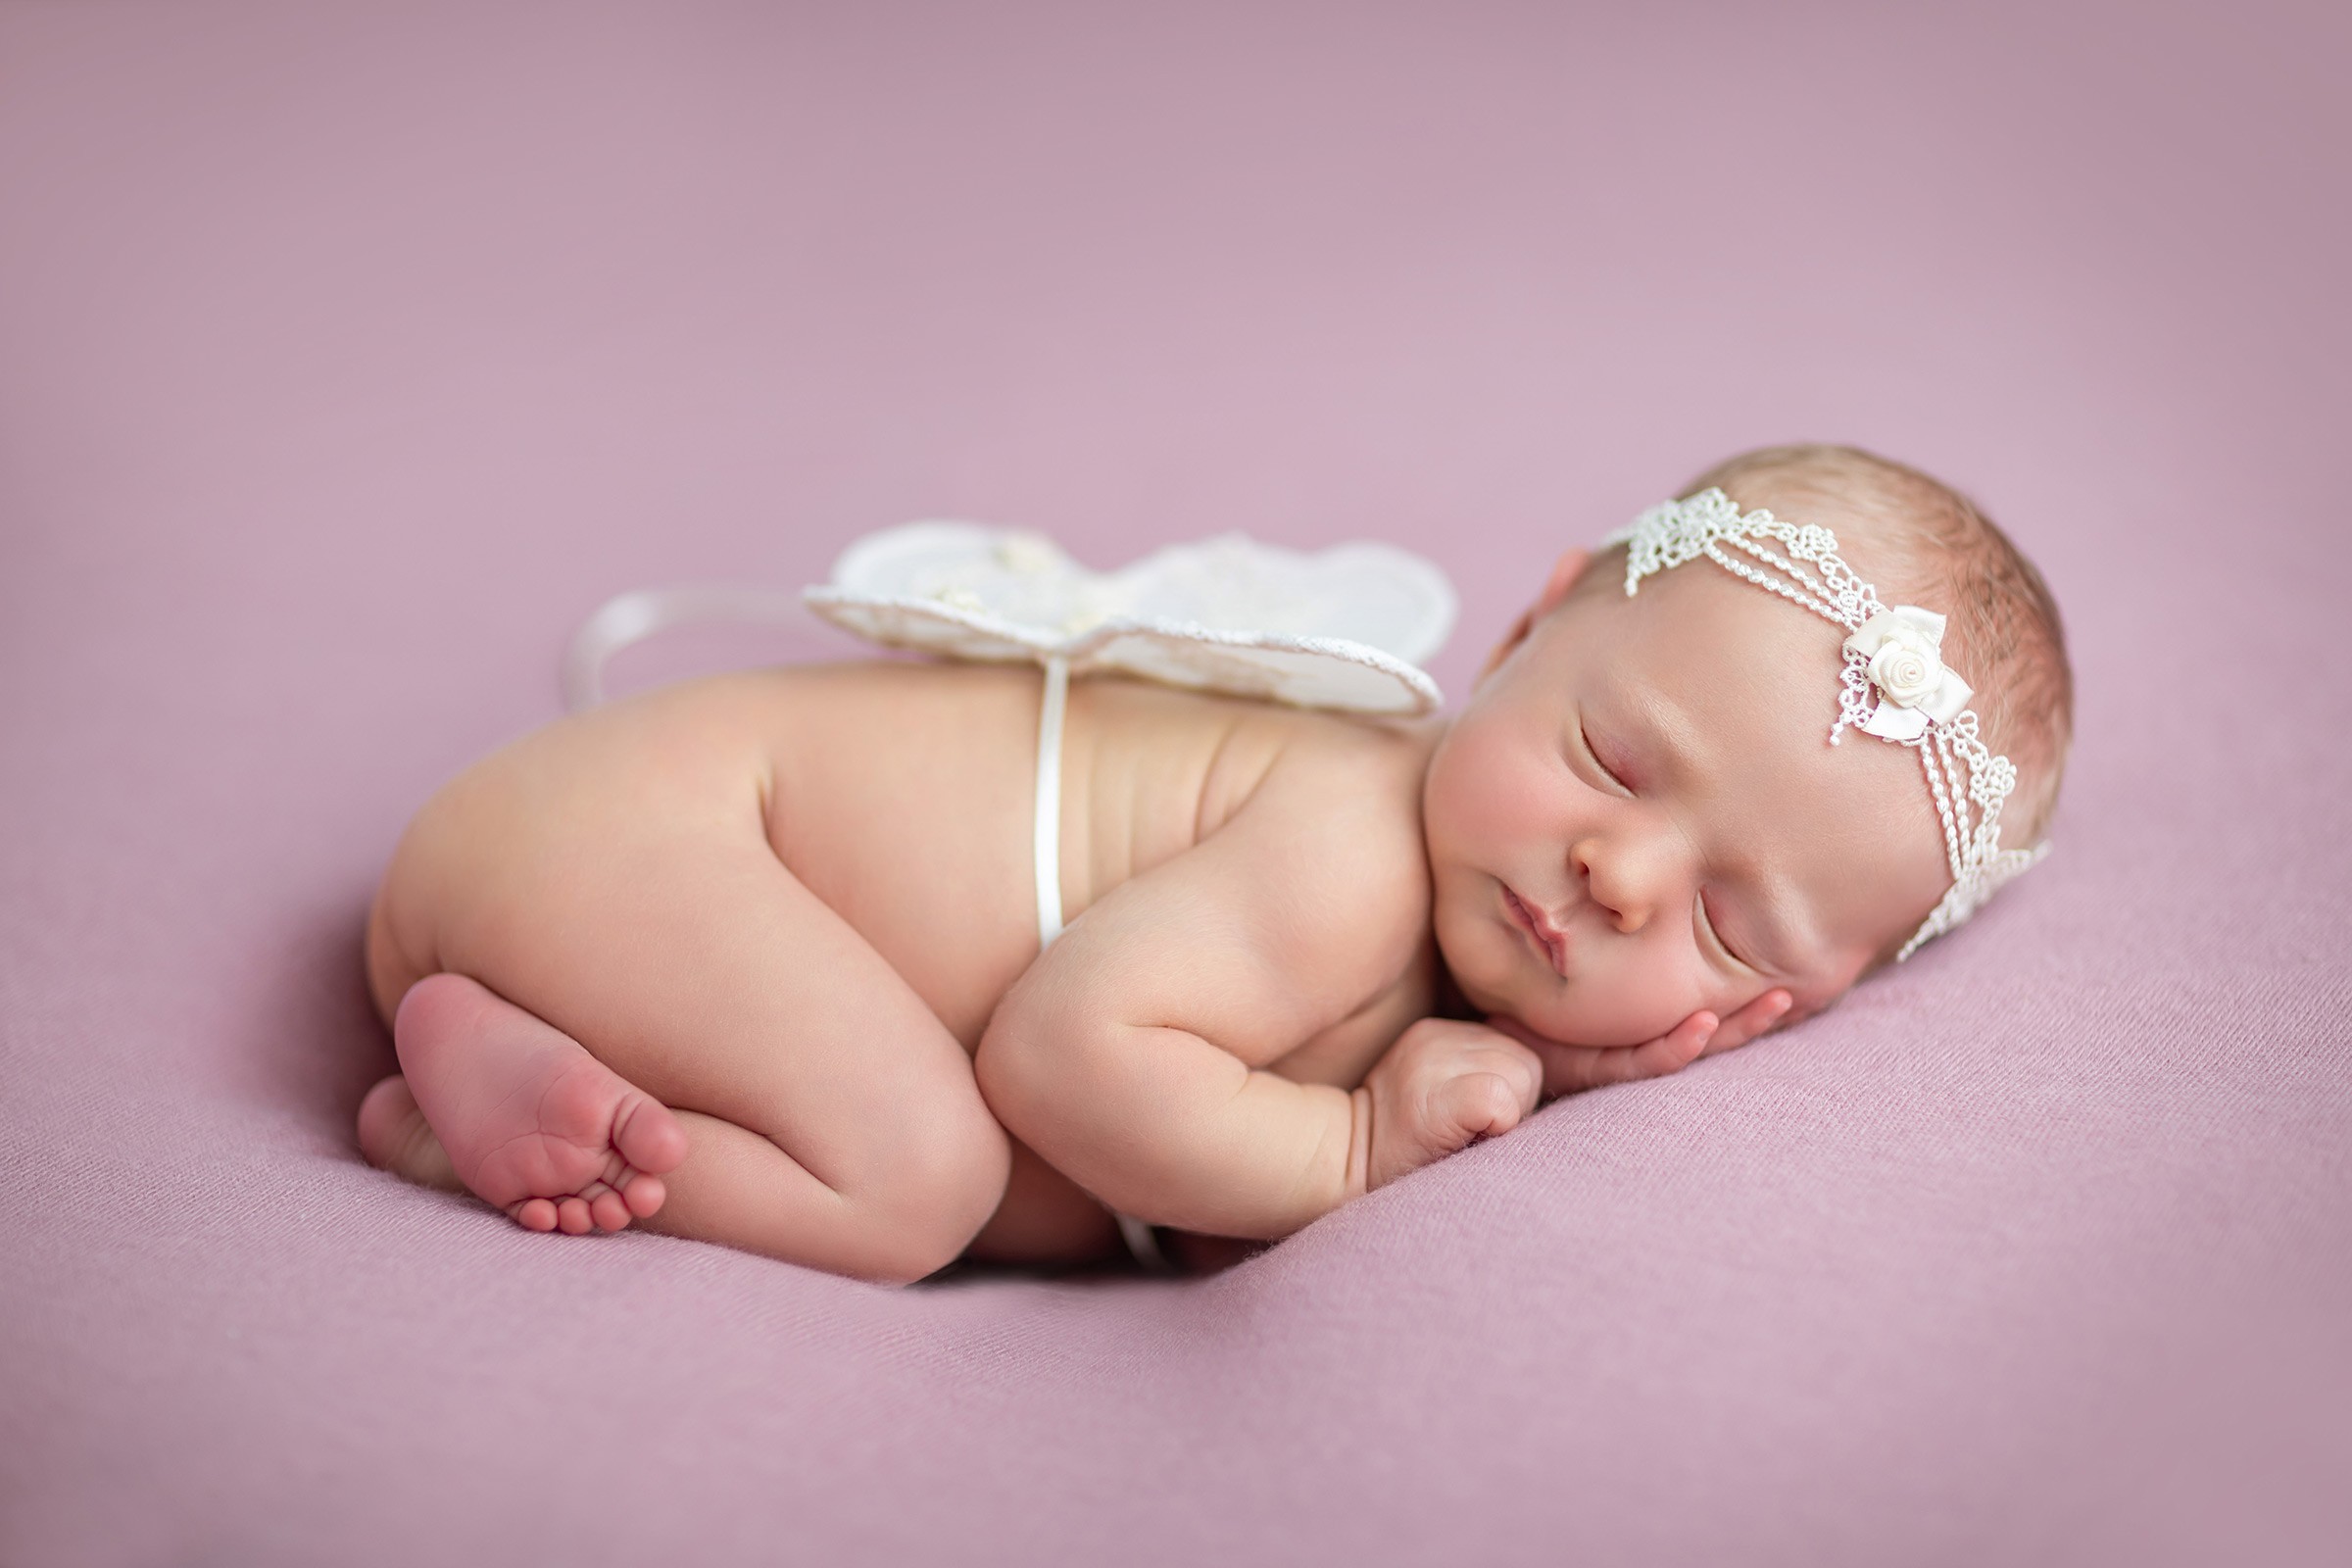 Tips to get the most of your newborn photo session